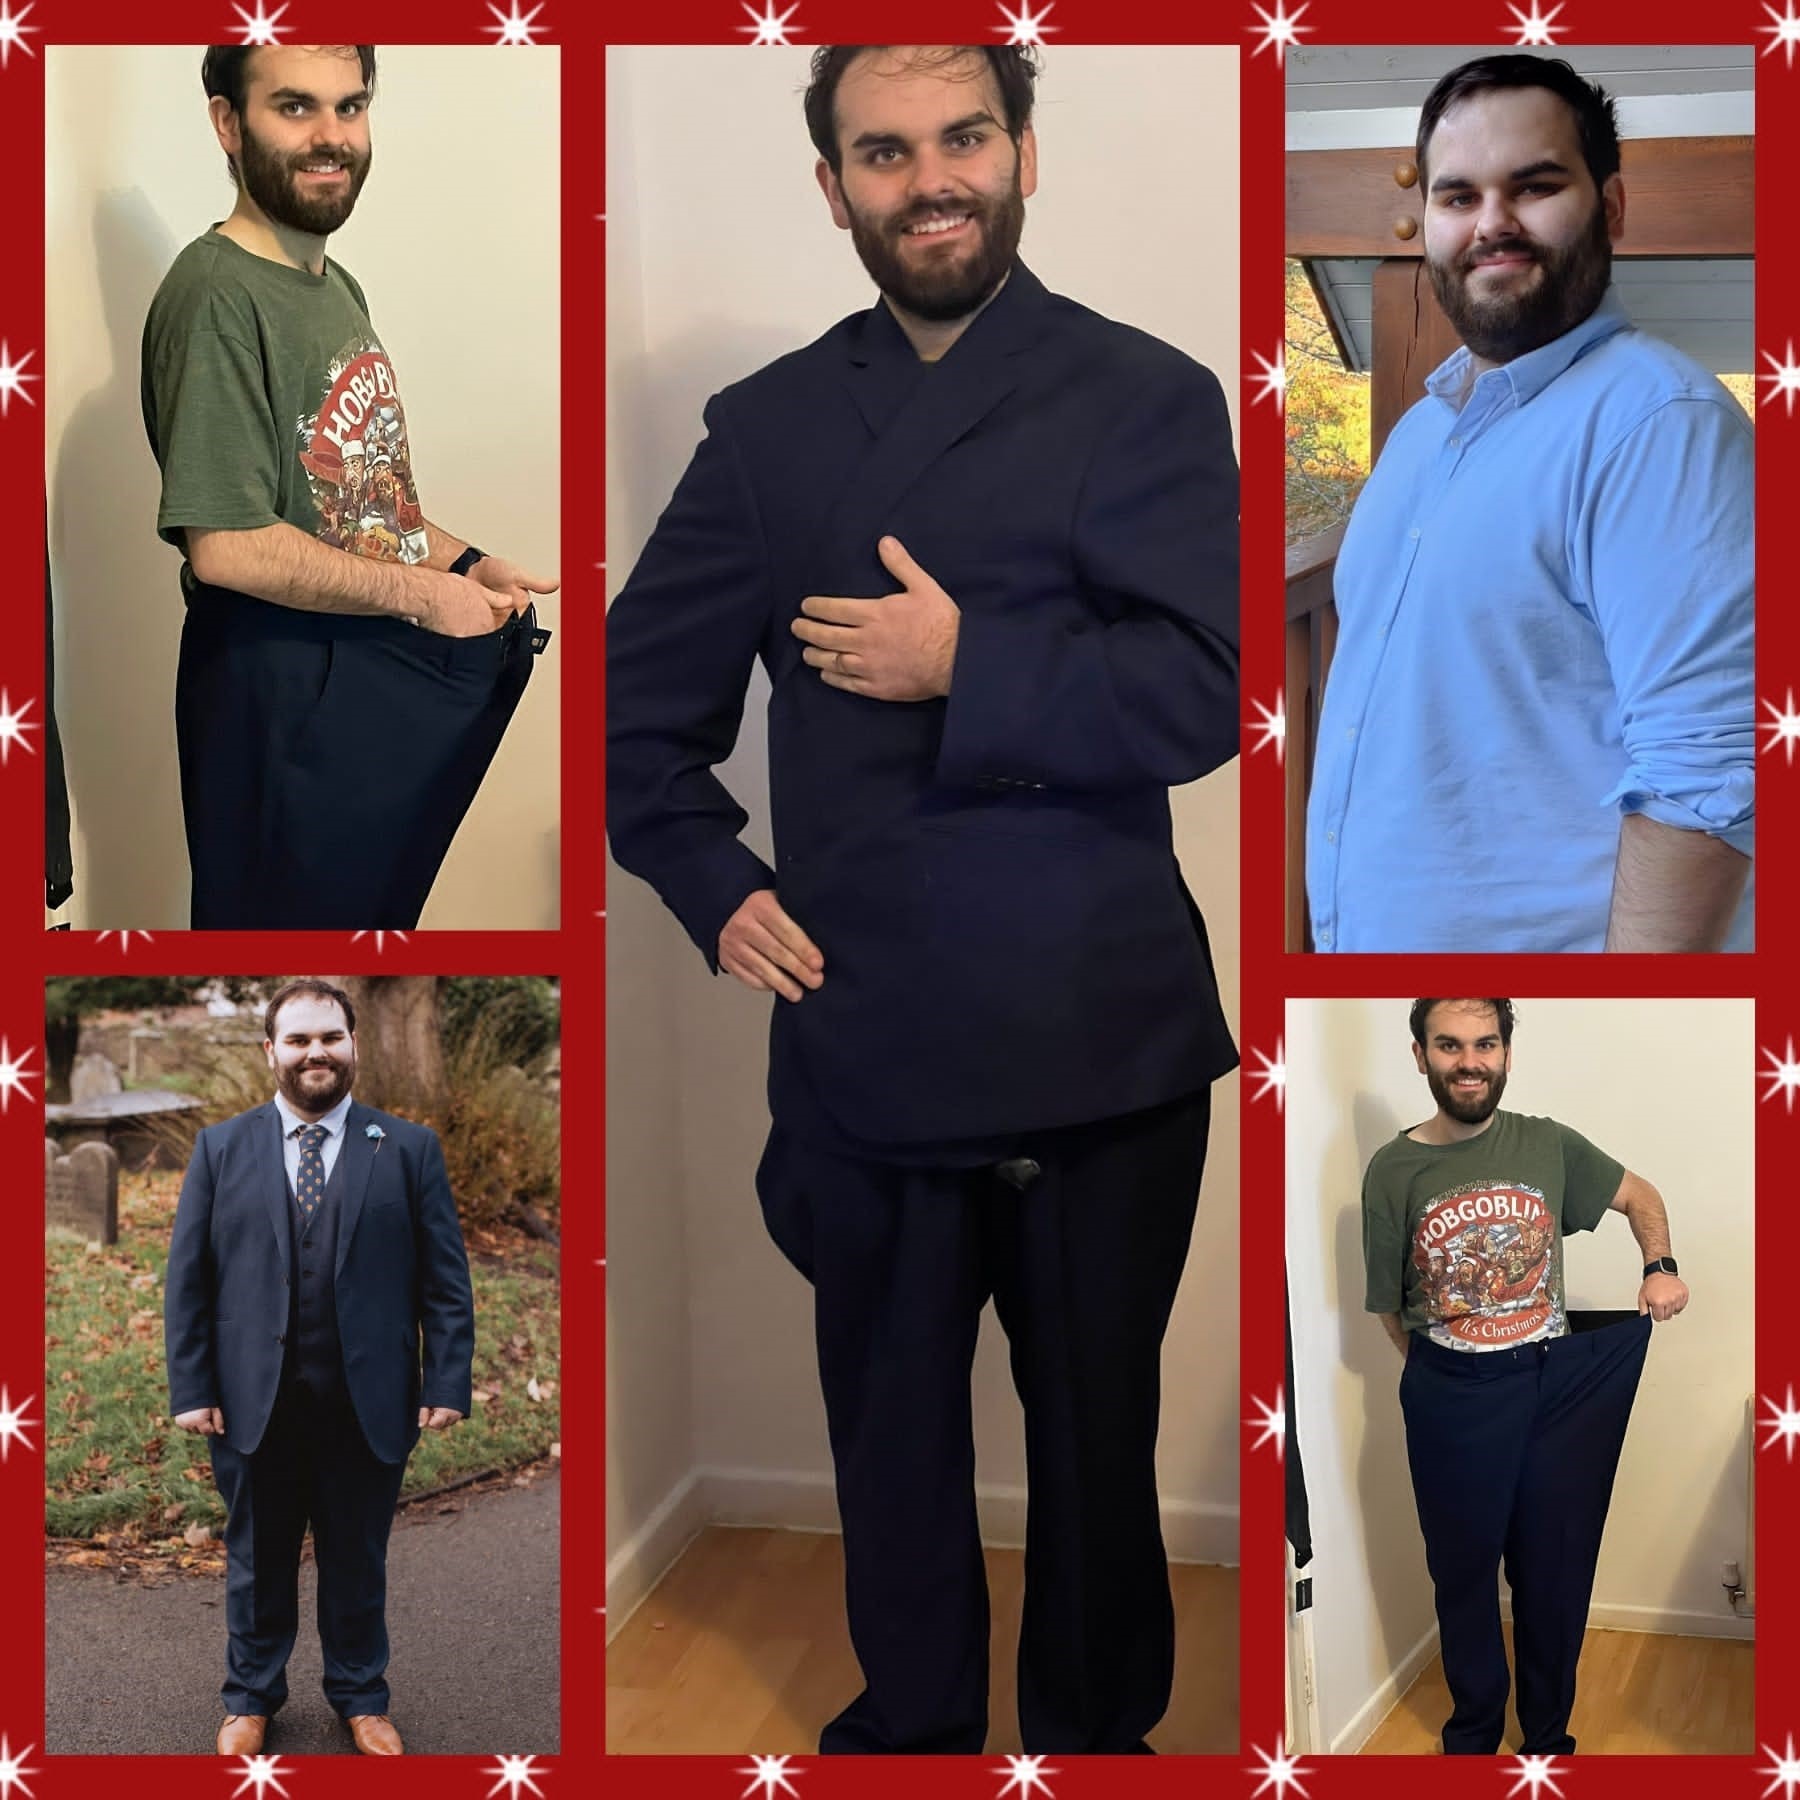 James was named Mr Sleek at the annual Slimming World competition.